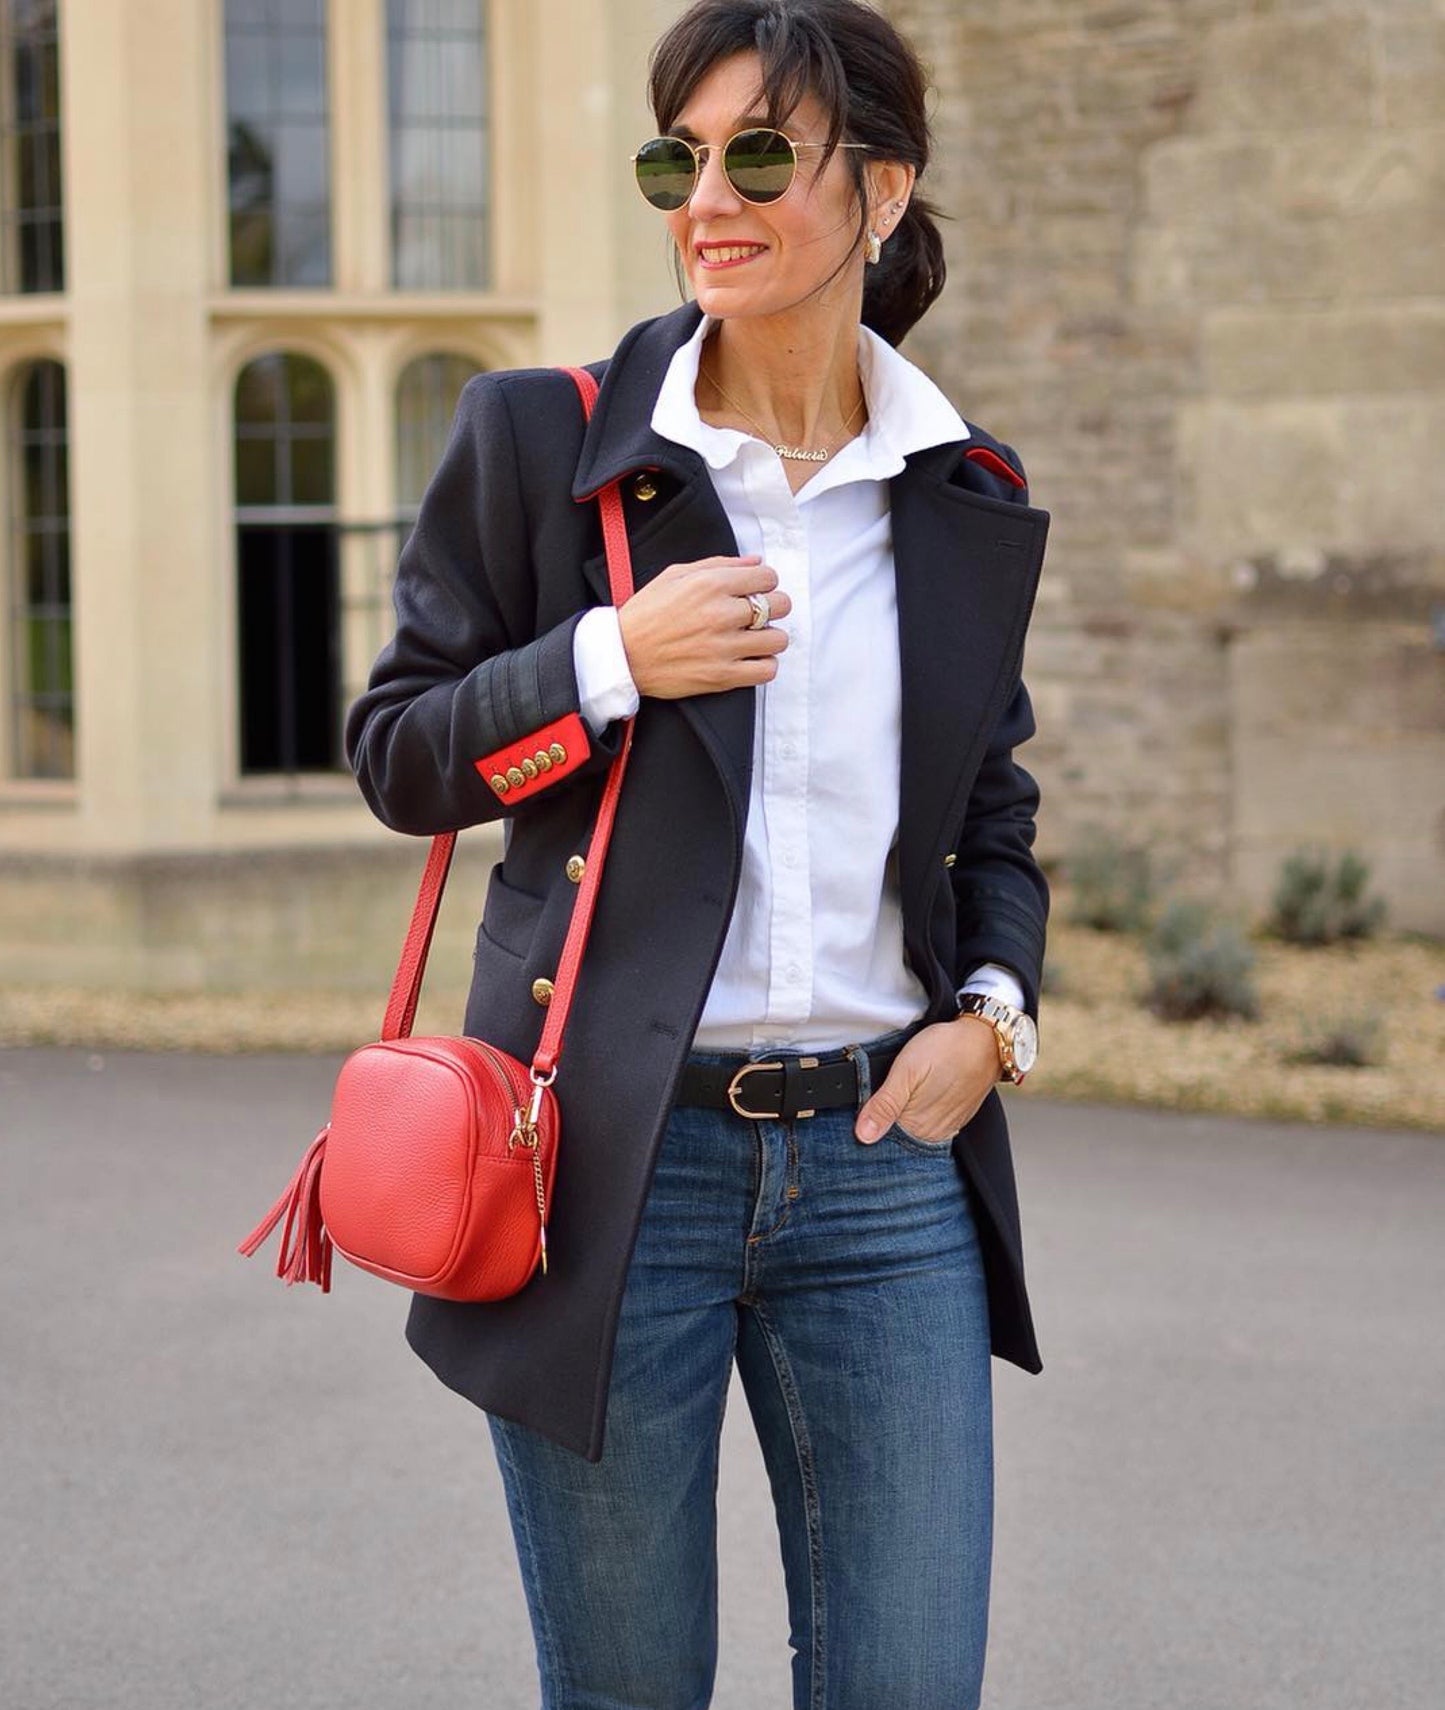 An image of a woman in a white shirt, navy blazer and jeans carrying a red leather messenger bag